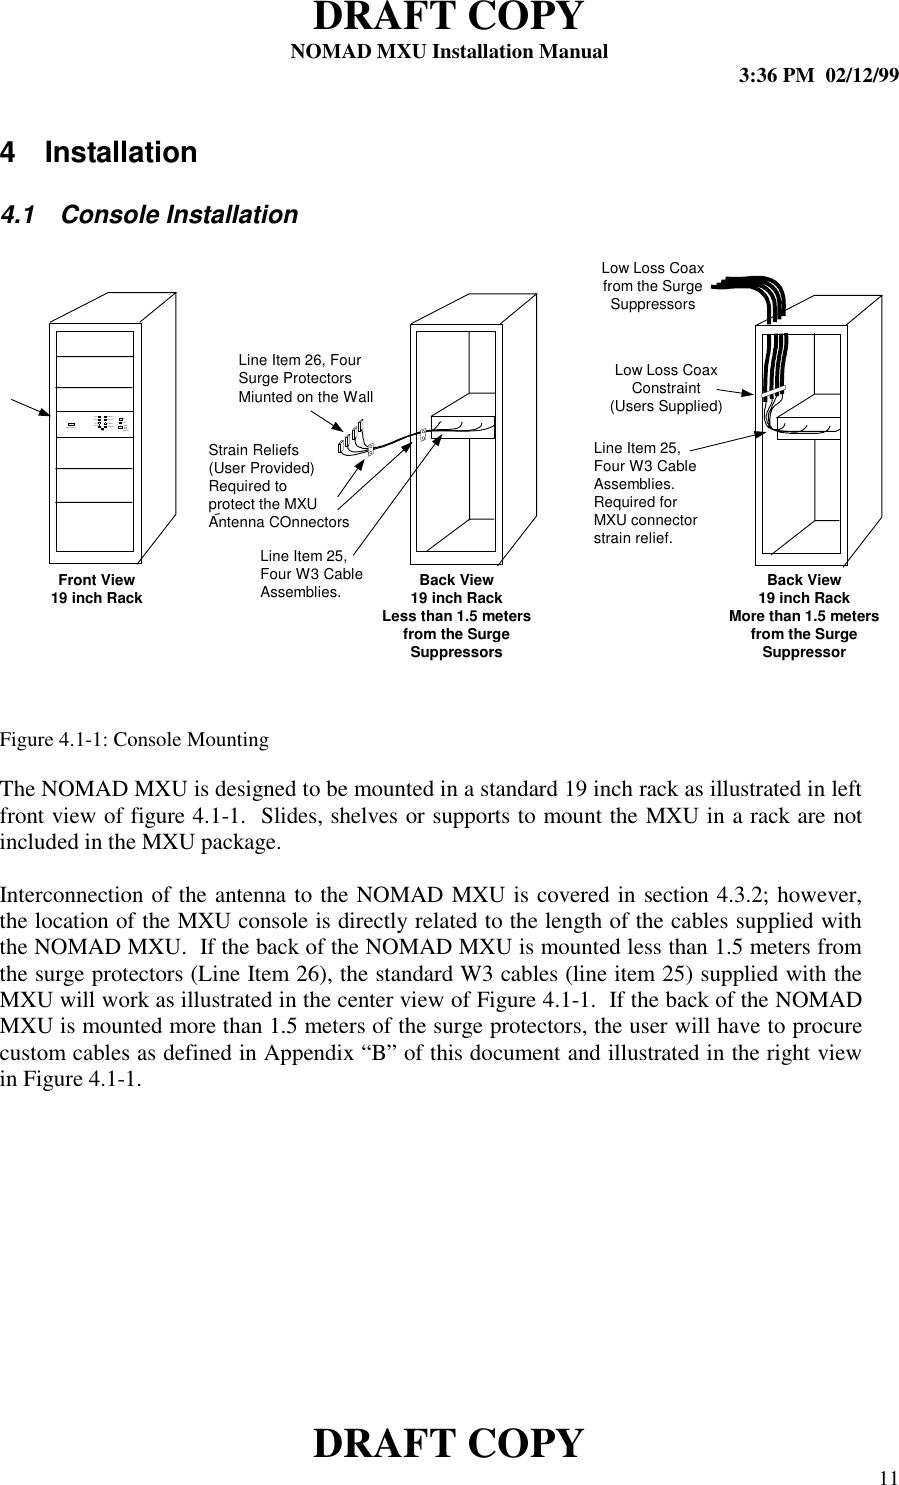 DRAFT COPYNOMAD MXU Installation Manual 3:36 PM  02/12/99DRAFT COPY 114 Installation4.1  Console InstallationFigure 4.1-1: Console MountingThe NOMAD MXU is designed to be mounted in a standard 19 inch rack as illustrated in leftfront view of figure 4.1-1.  Slides, shelves or supports to mount the MXU in a rack are notincluded in the MXU package.Interconnection of the antenna to the NOMAD MXU is covered in section 4.3.2; however,the location of the MXU console is directly related to the length of the cables supplied withthe NOMAD MXU.  If the back of the NOMAD MXU is mounted less than 1.5 meters fromthe surge protectors (Line Item 26), the standard W3 cables (line item 25) supplied with theMXU will work as illustrated in the center view of Figure 4.1-1.  If the back of the NOMADMXU is mounted more than 1.5 meters of the surge protectors, the user will have to procurecustom cables as defined in Appendix “B” of this document and illustrated in the right viewin Figure 4.1-1.Line 1Line 2Line 3Line 4Channel 1Channel 2Channel 3OnReadyPowerChannel 1 InitiatePowerDownSequenceContr ol  In ter fac eFront View19 inch Rack Back View19 inch RackLess than 1.5 metersfrom the SurgeSuppressorsBack View19 inch RackMore than 1.5 metersfrom the SurgeSuppressorLow Loss Coaxfrom the SurgeSuppressorsLow Loss CoaxConstraint(Users Supplied)Line Item 25,Four W3 CableAssemblies.Required forMXU connectorstrain relief.Line Item 25,Four W3 CableAssemblies.Line Item 26, FourSurge ProtectorsMiunted on the WallStrain Reliefs(User Provided)Required toprotect the MXUAntenna COnnectors